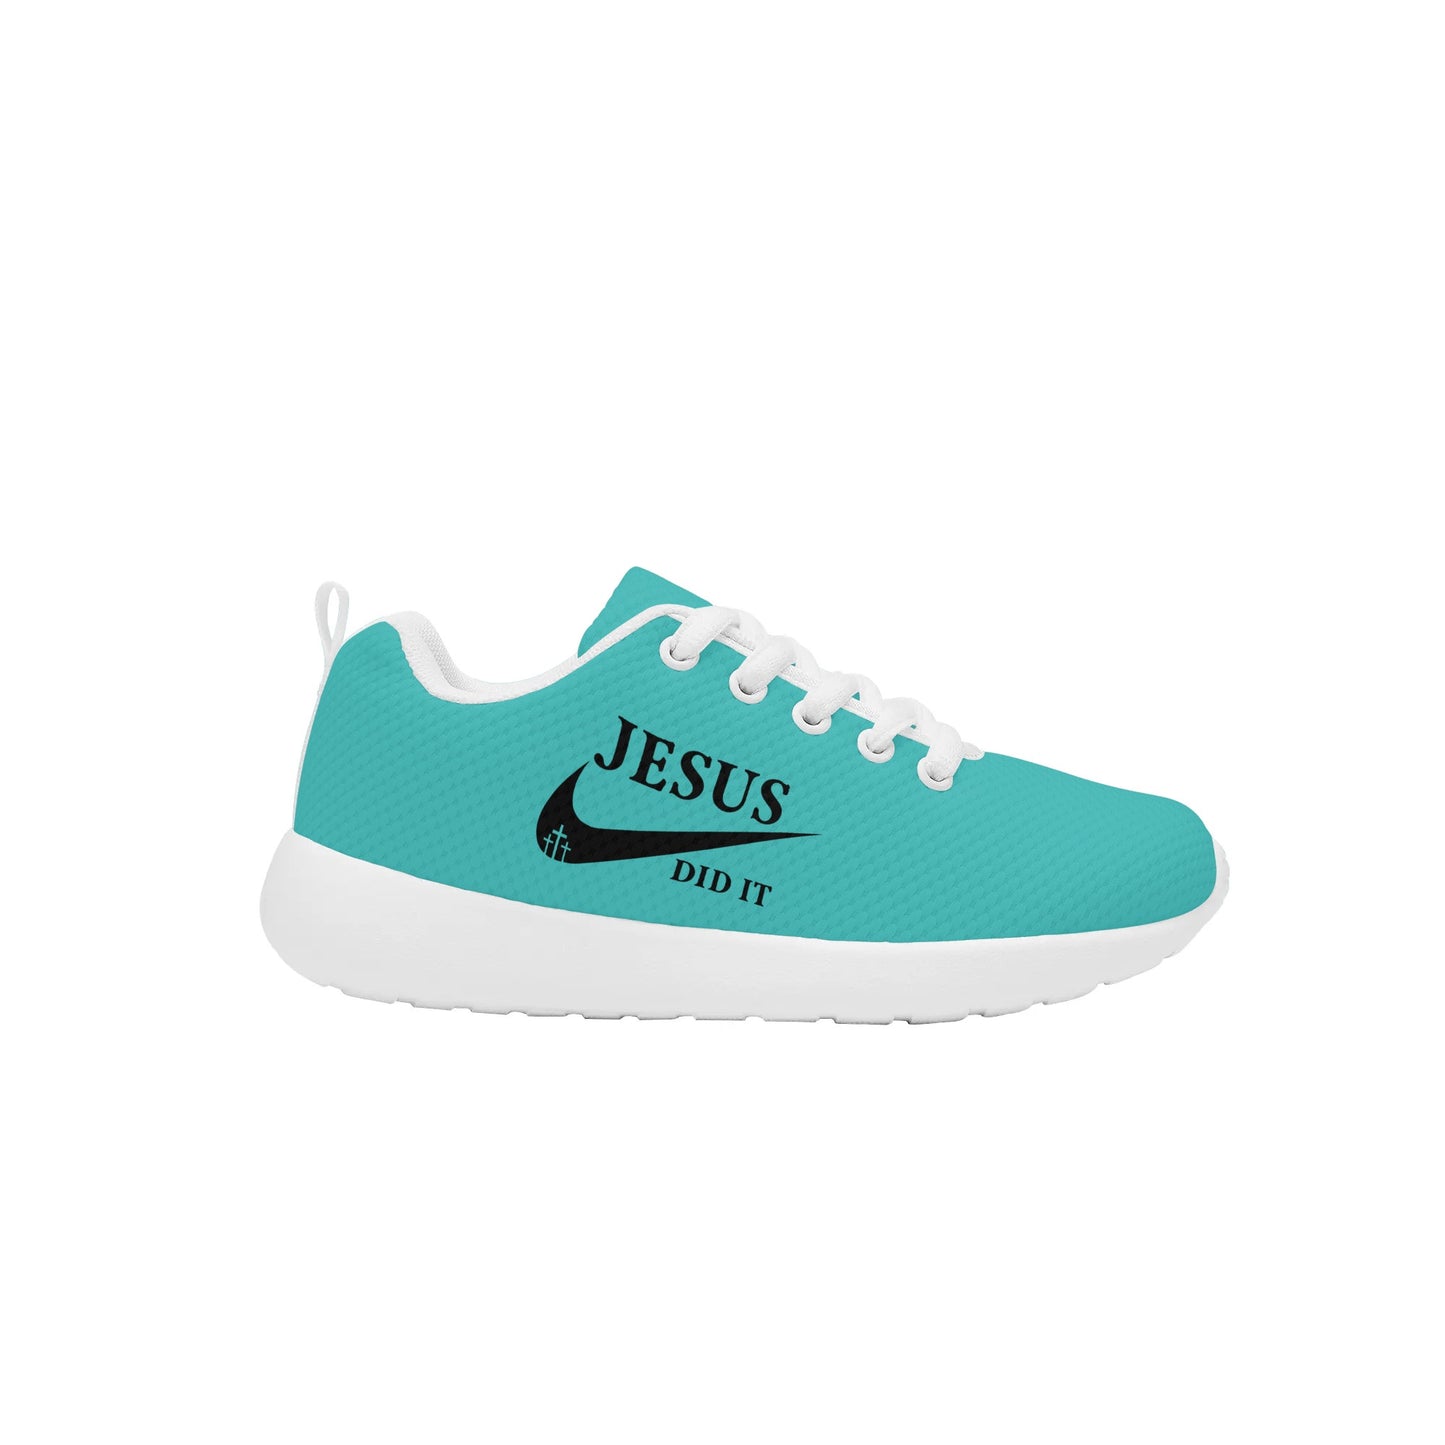 Jesus Did It (Like Nike) Kids Lace-up Athletic Christian Sneakers popcustoms